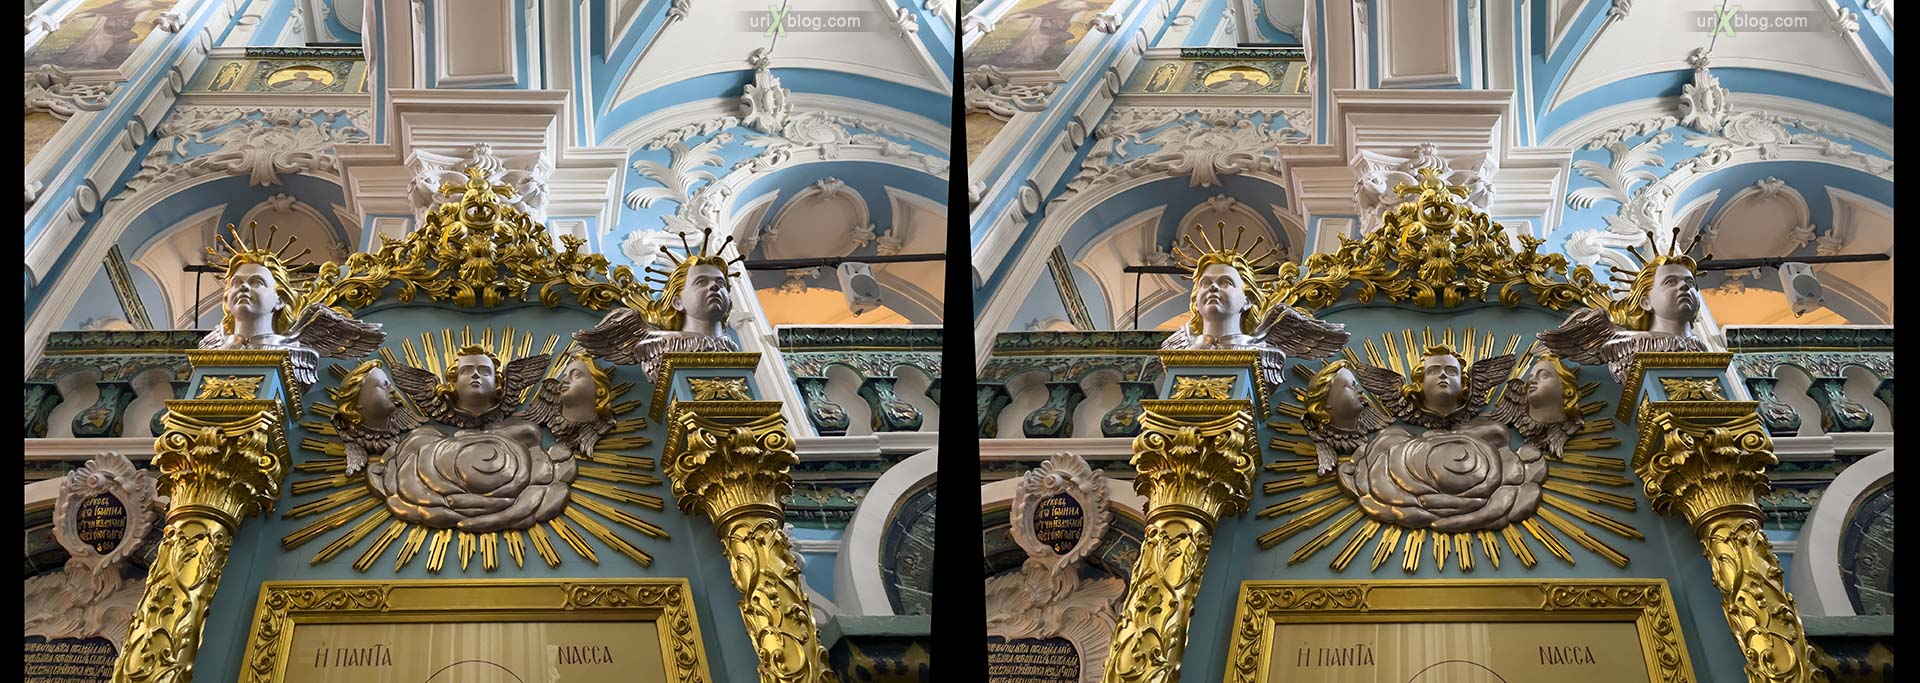 church, Resurrection Cathedral, interior, New Jerusalem, Istra, Russia, 3D, stereo pair, cross-eyed, crossview, cross view stereo pair, stereoscopic